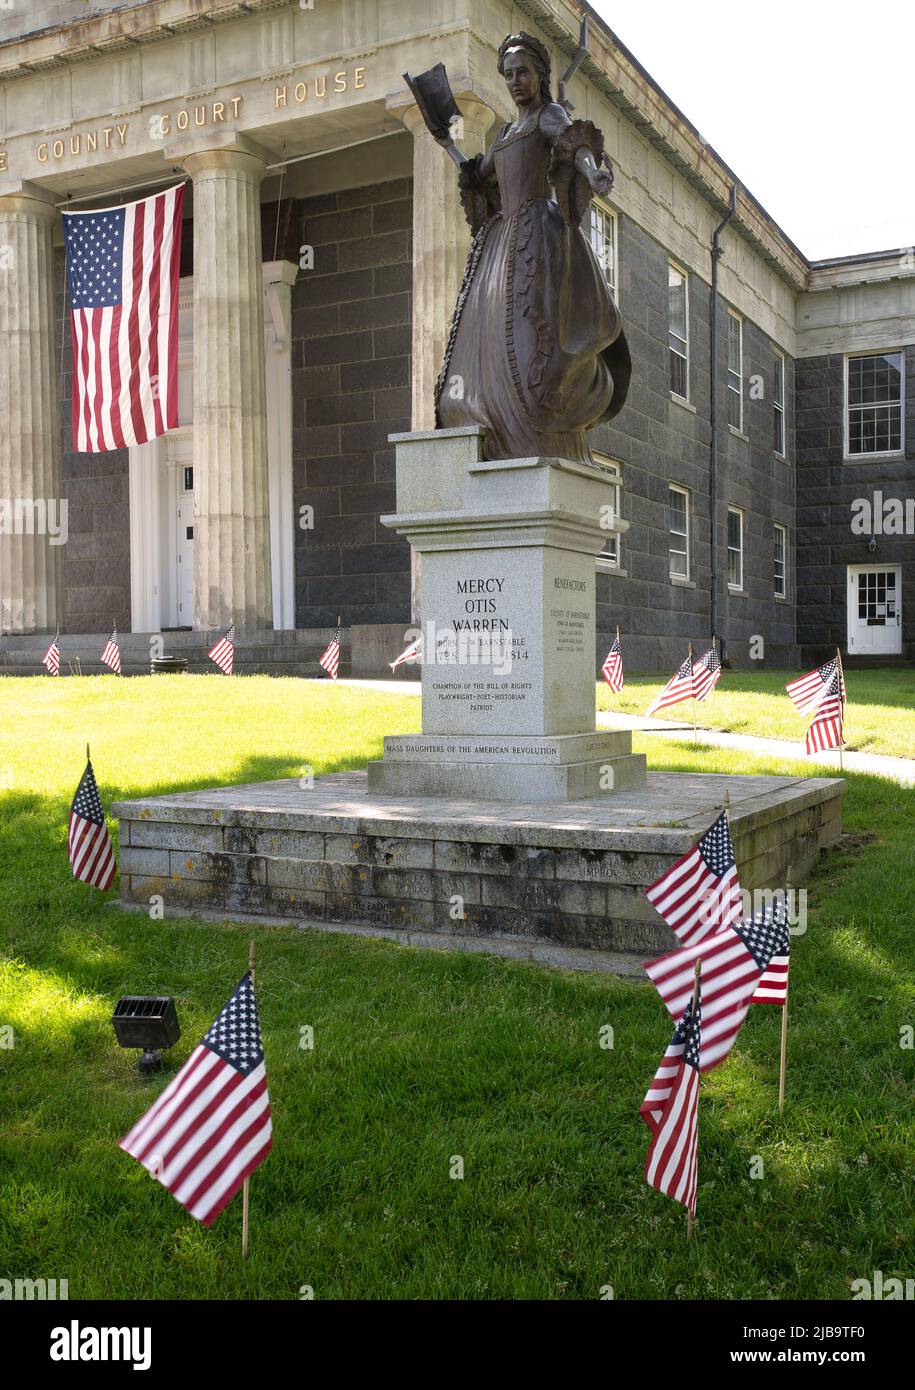 Statue of Mercy Otis Warren (1728 - 1814) and Memorial Day decore on the lawn of the Barnstable County Superior Court in Barnstable, Massachusetts, on Stock Photo